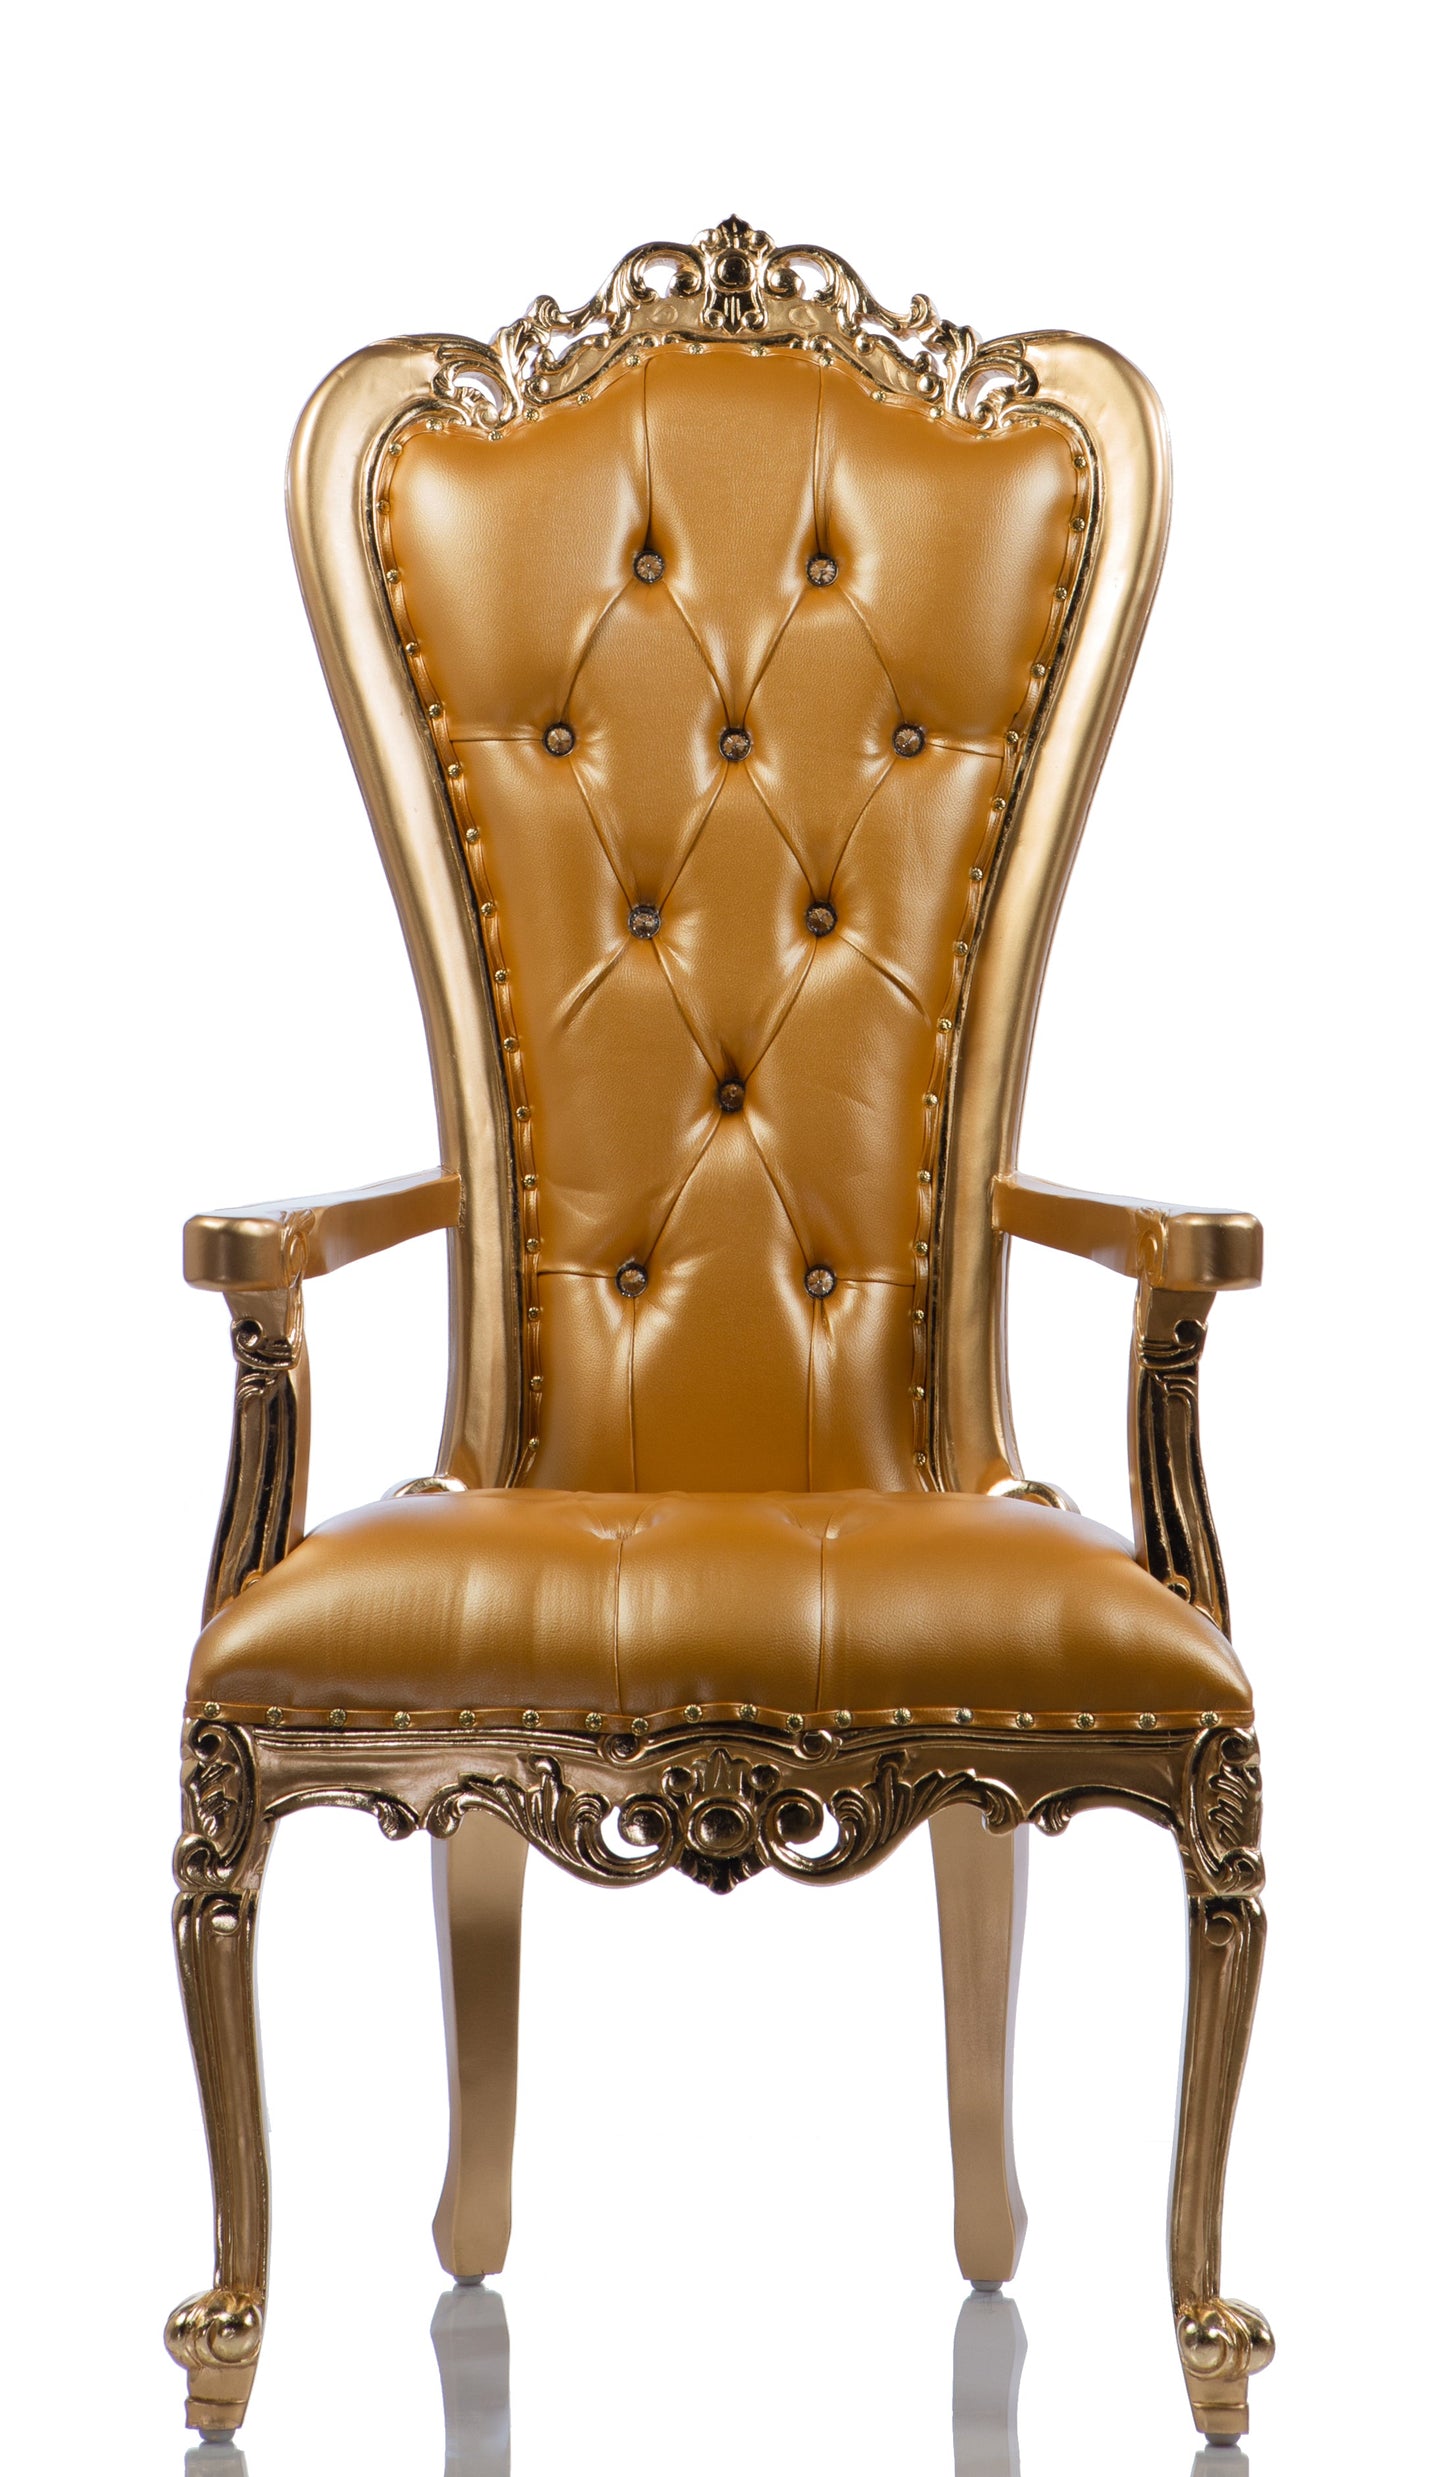 The Golden Glam Arm Chair Throne (Gold/Gold)